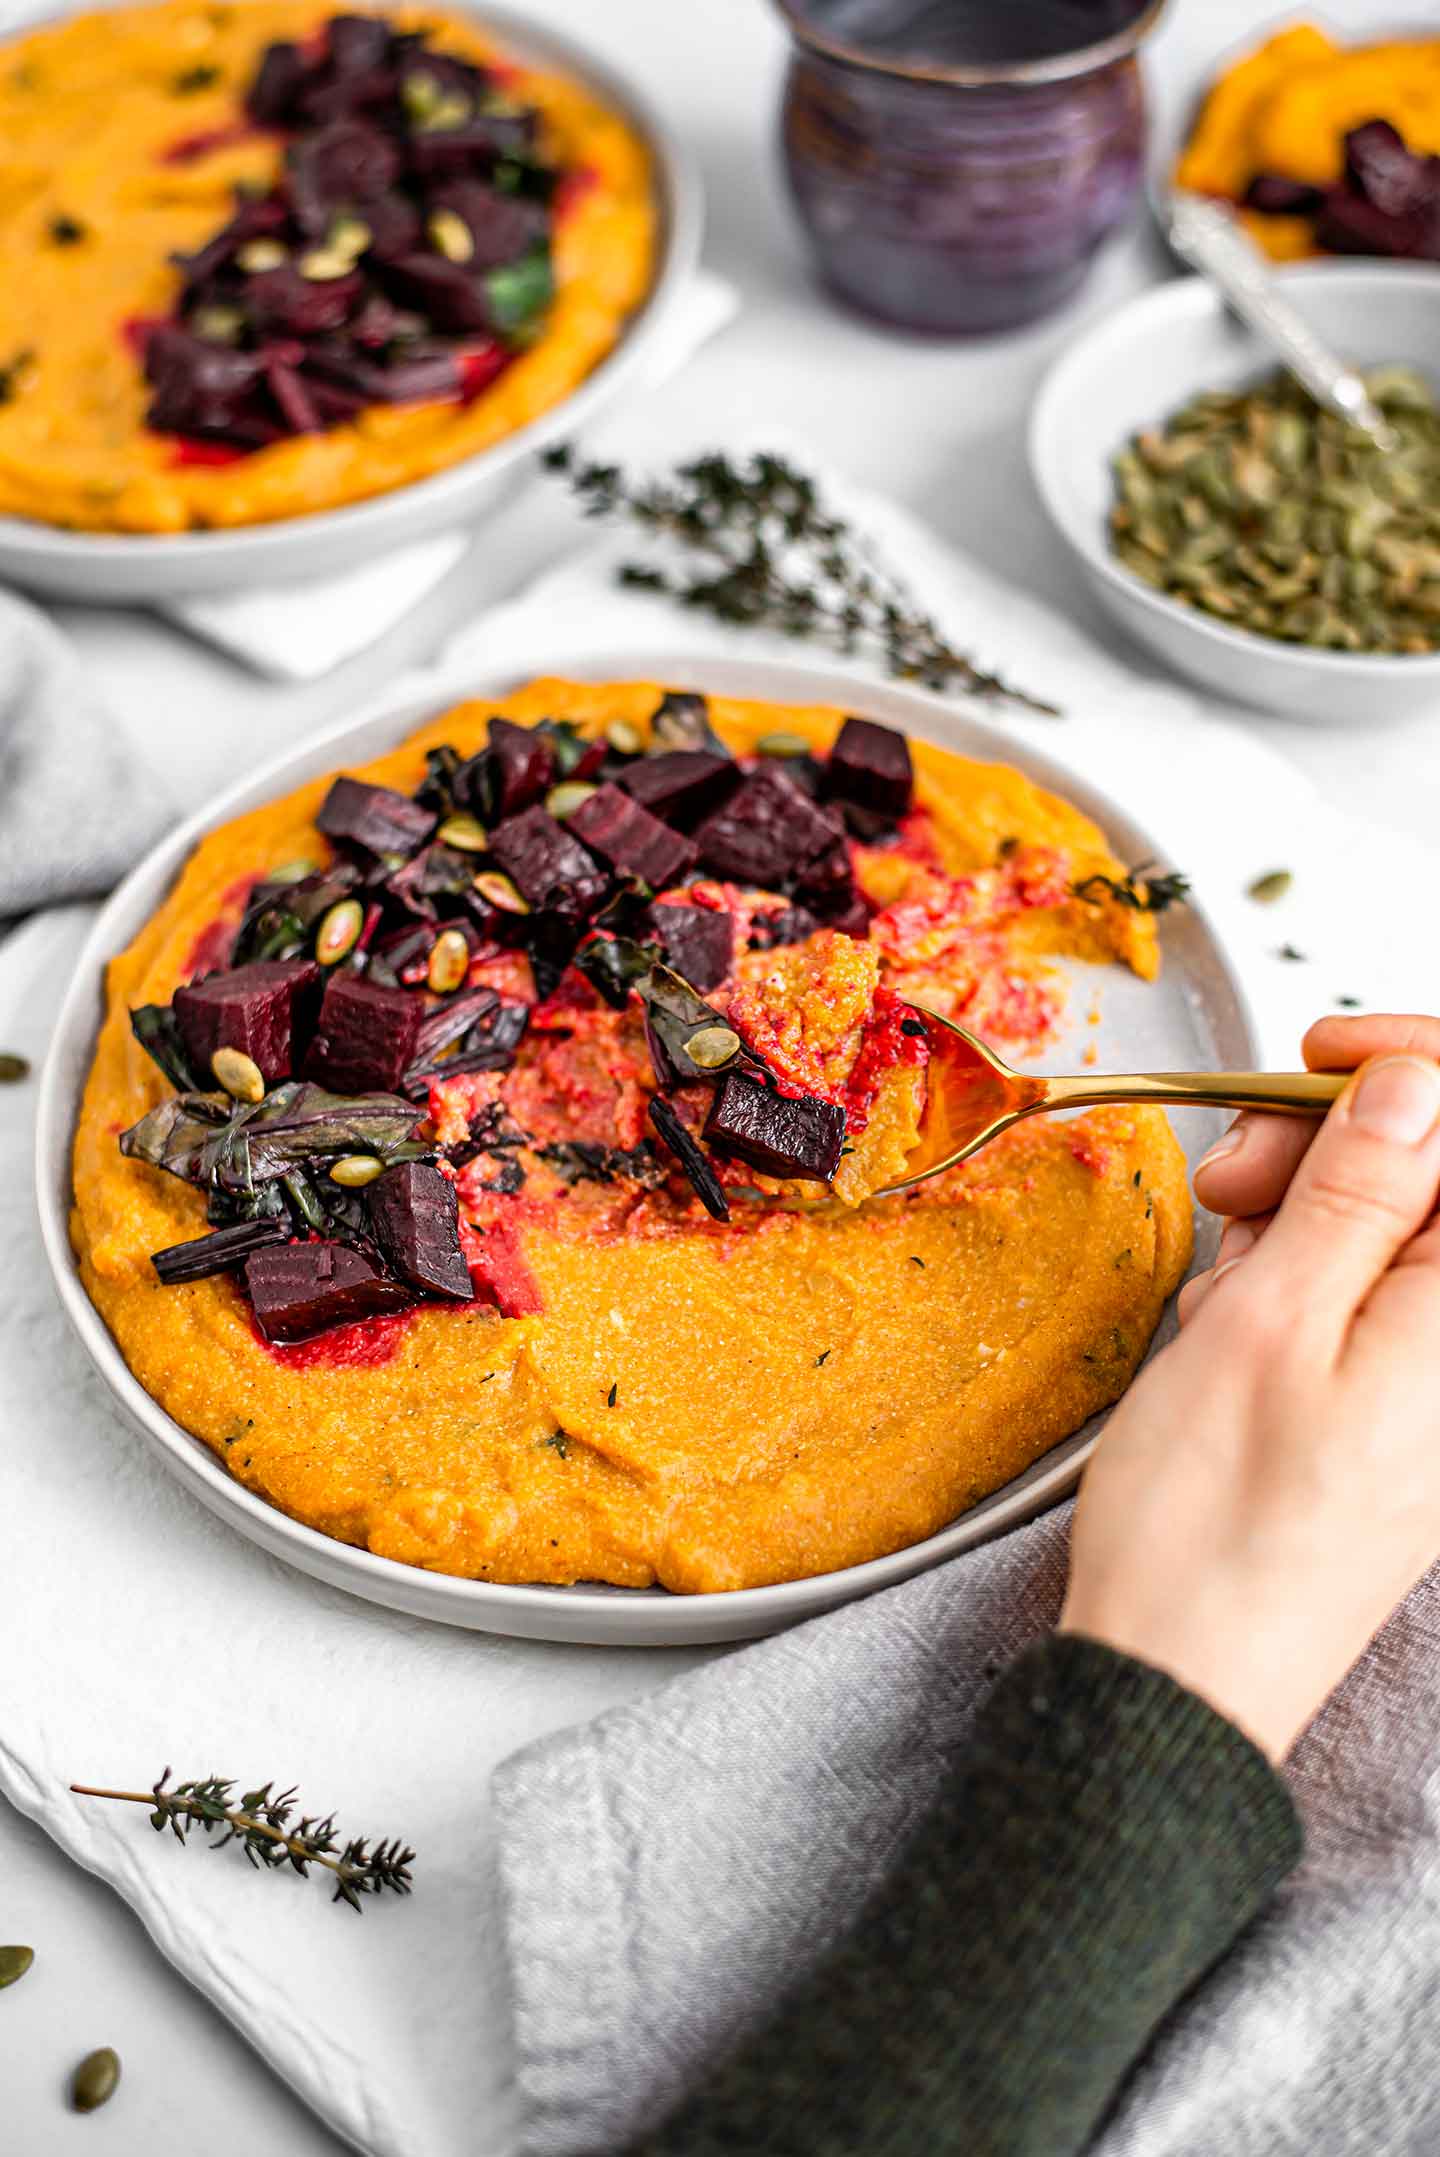 Top down view of a hand holding a spoon that is scooping up the polenta. The orange pumpkin flavoured polenta swirls with the purple colour from the beets.